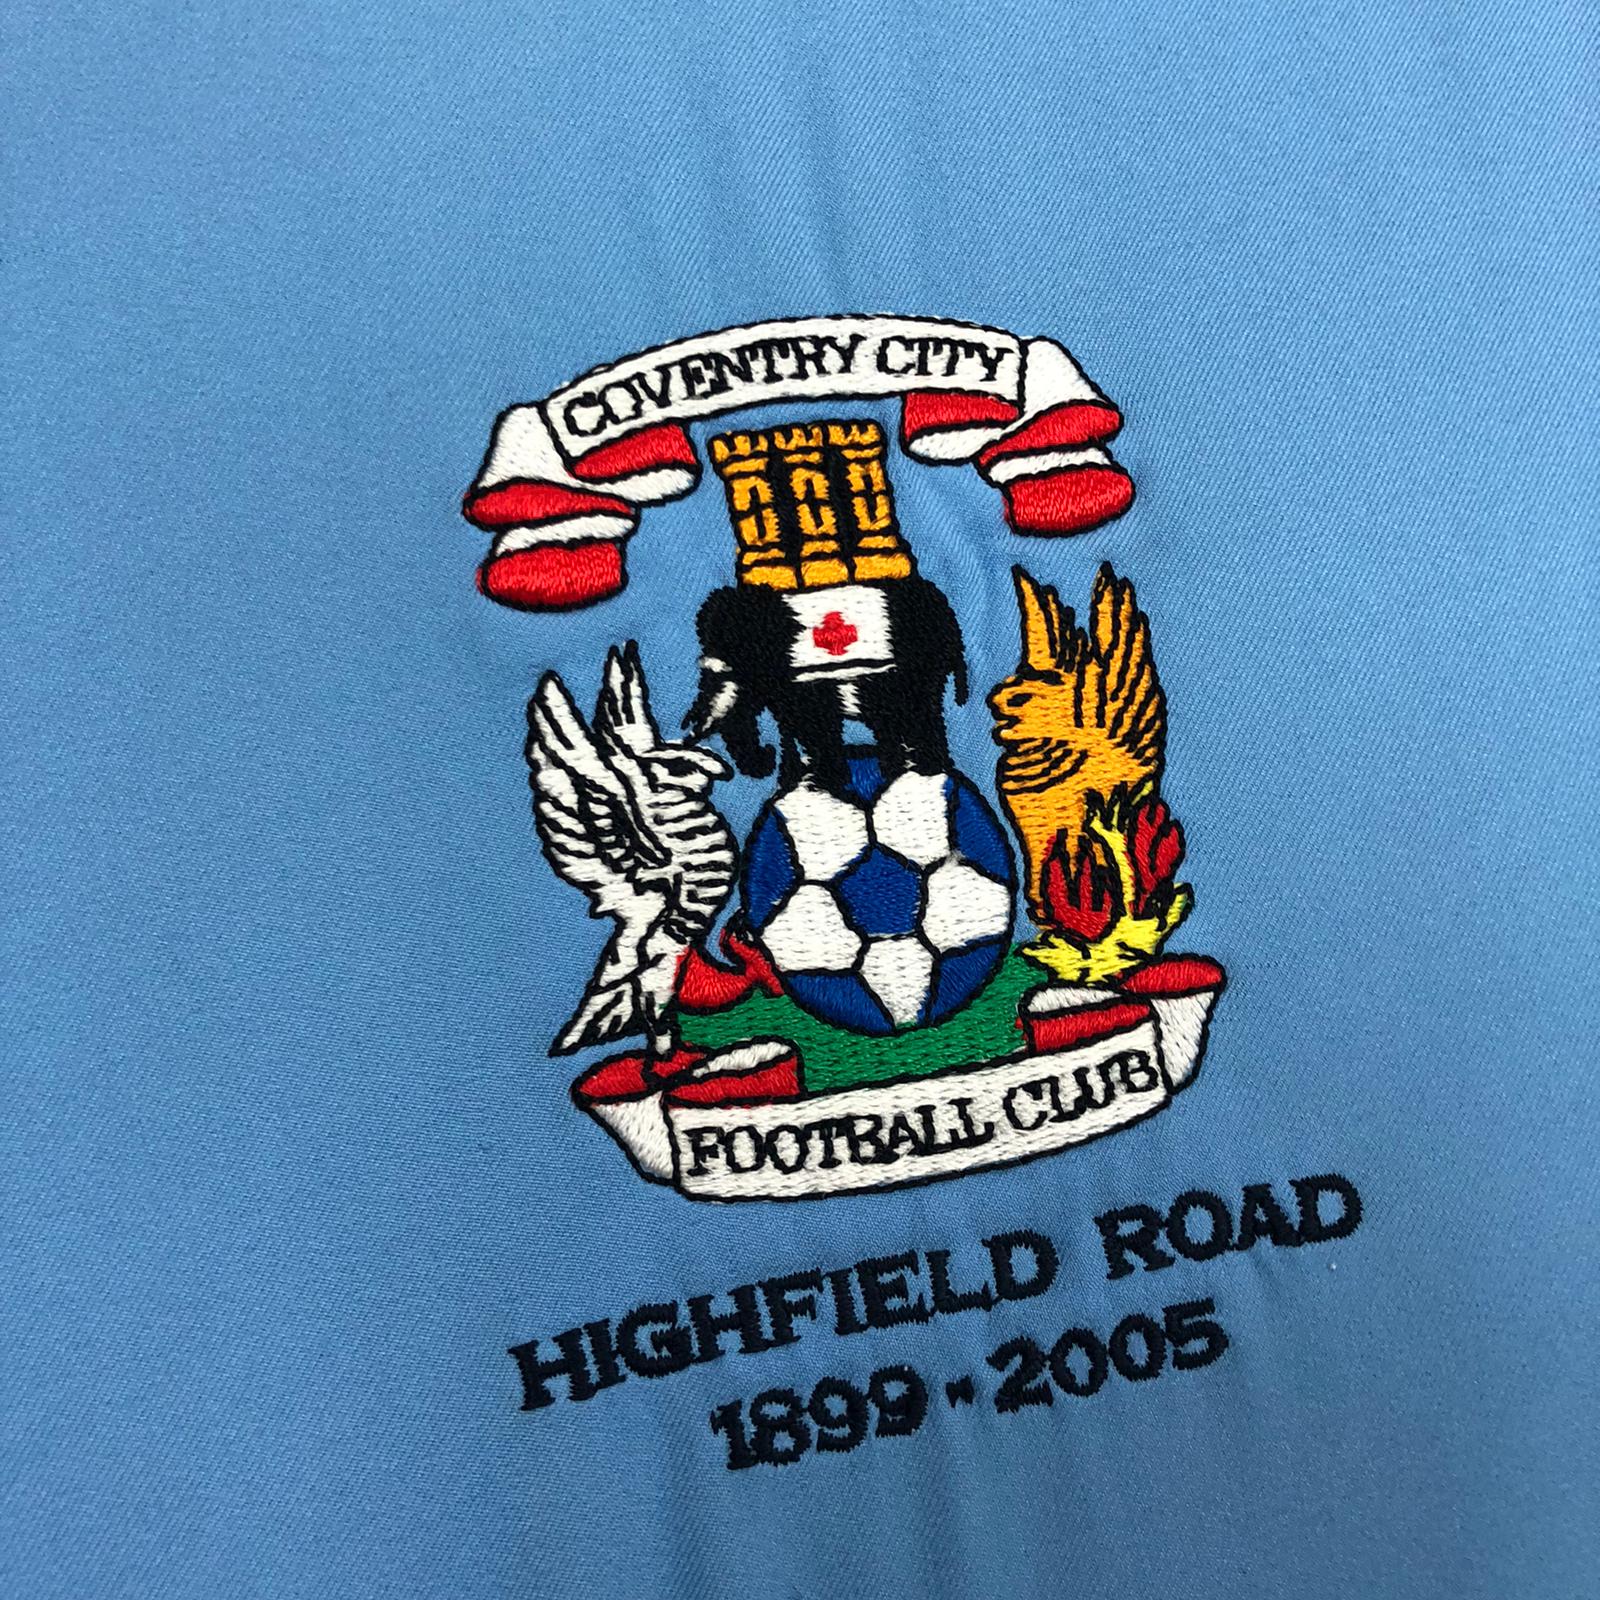 Coventry City - The final game at Highfield Road - 30th April 2005